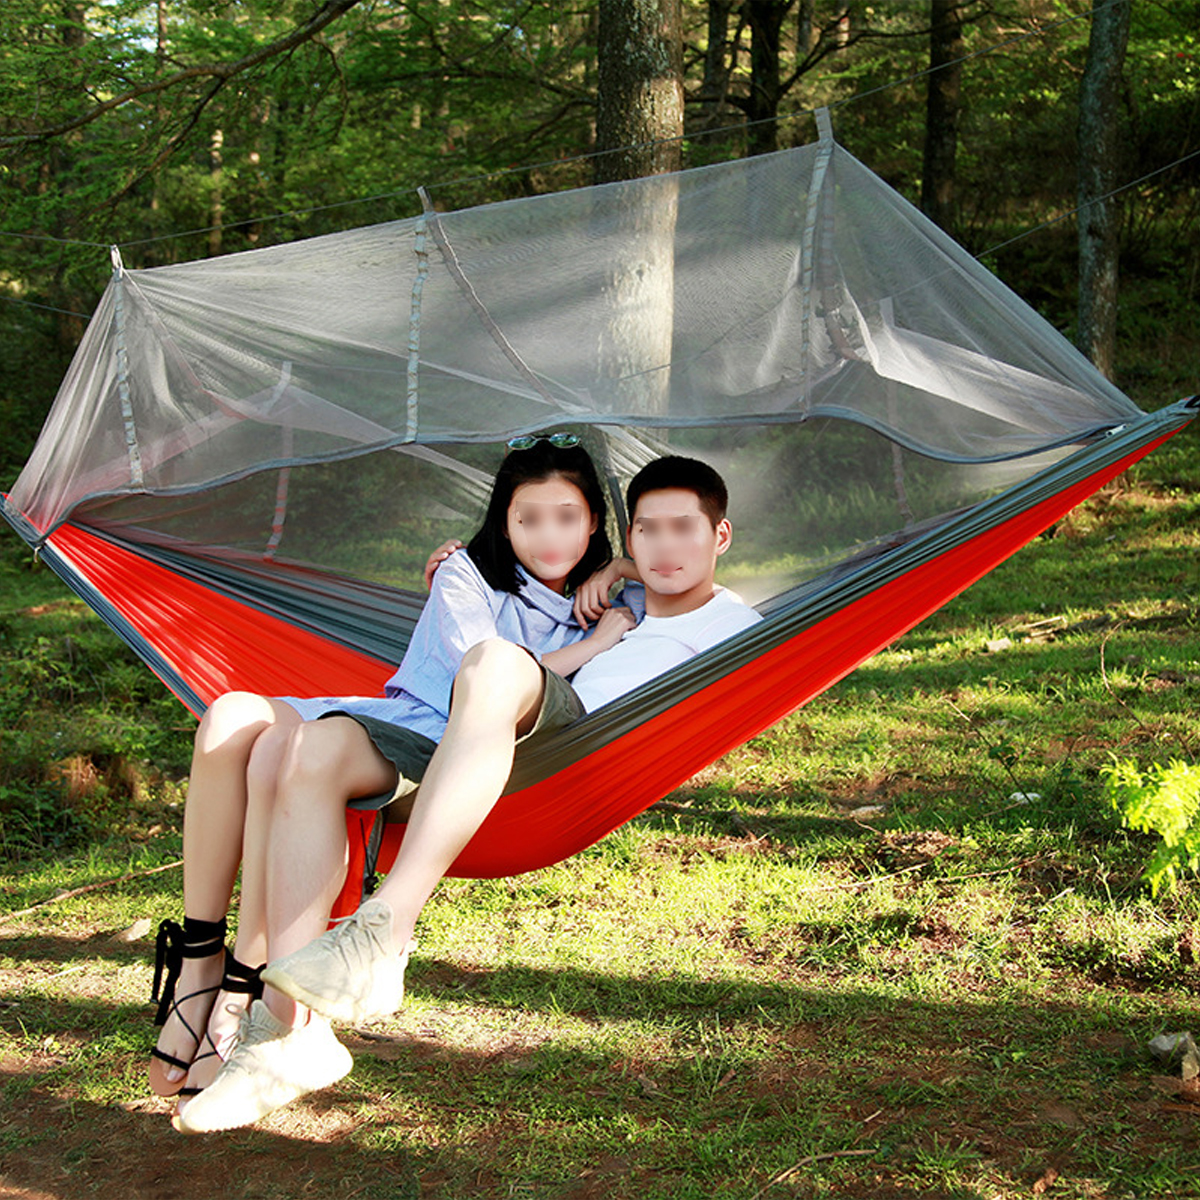 1-2-Person-Camping-Hammock-with-Mosquito-Net-Hanging-Bed-Sleeping-Swing-for-Outdoor-Hiking-Travel-Ga-1803189-8